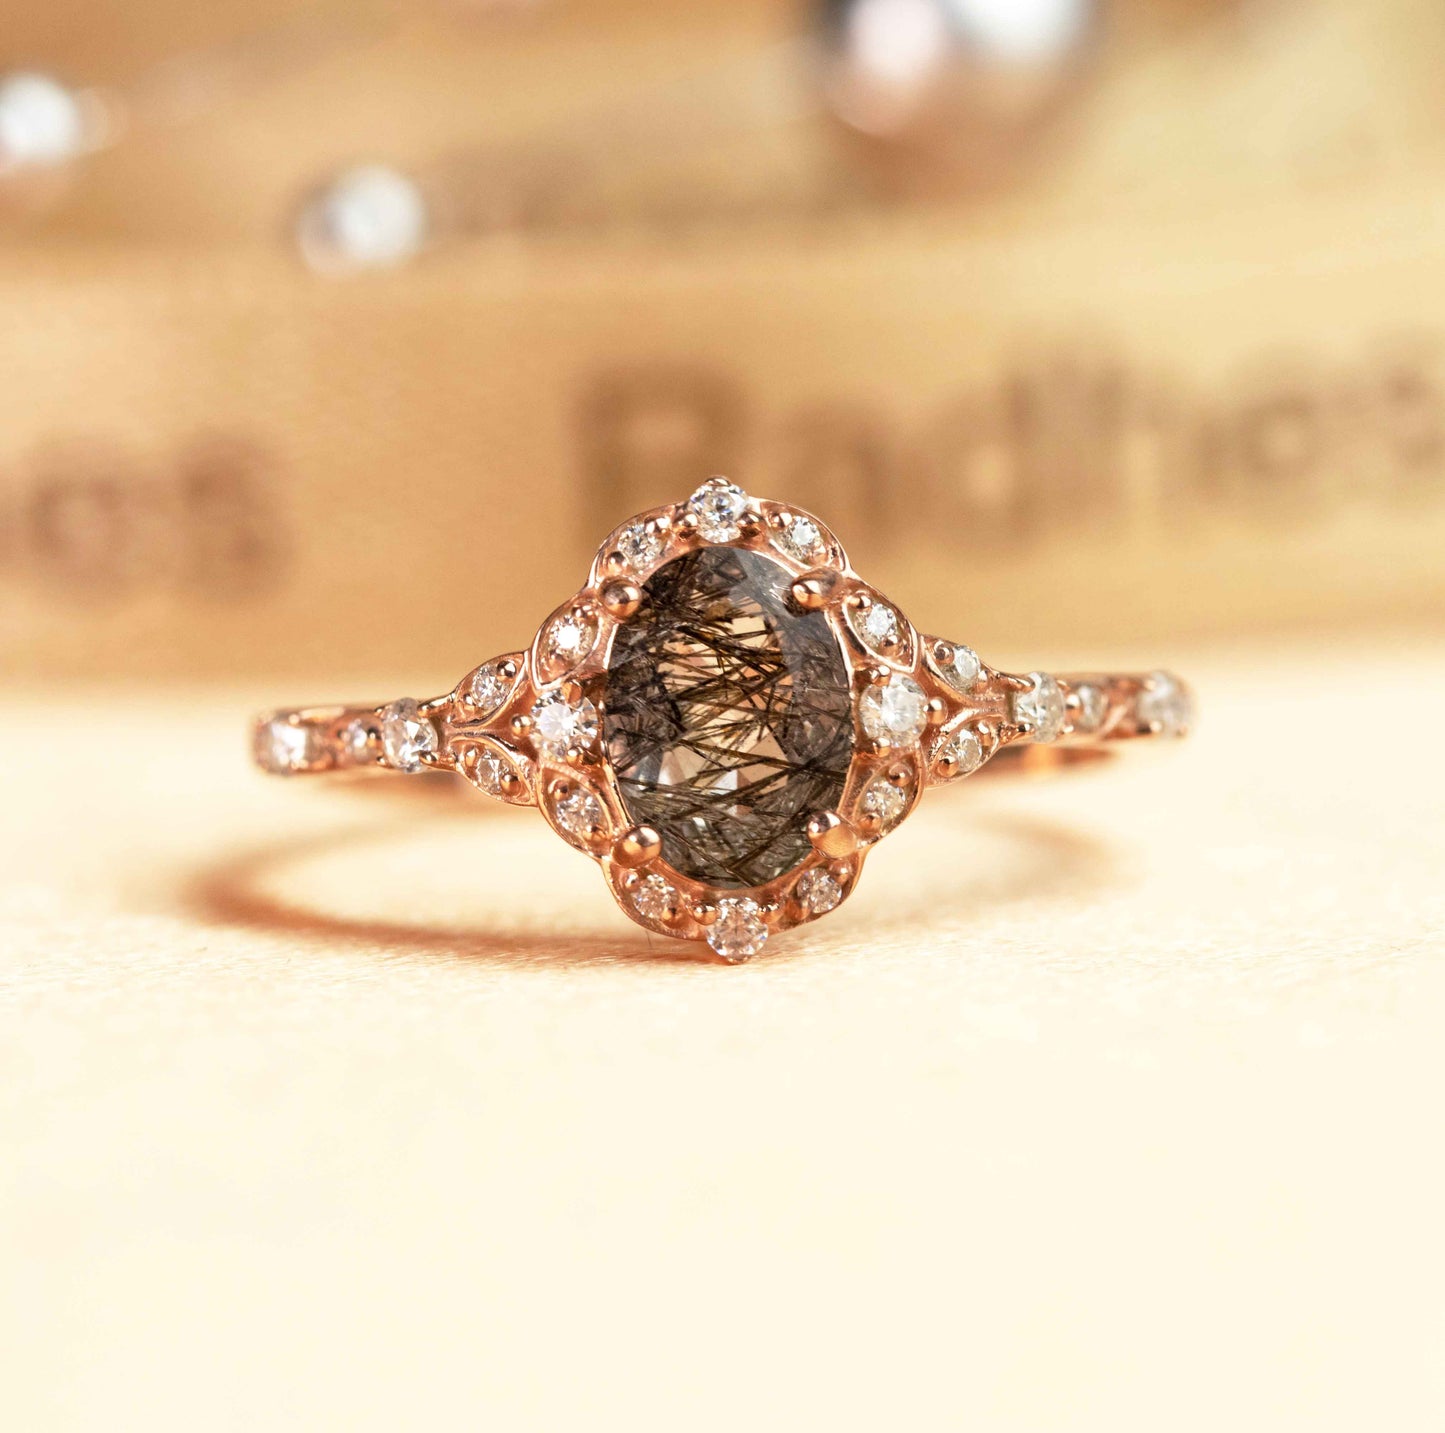 Unique Vintage 1.45 carat Oval Cut Rutilated Quartz and Diamond Halo Ring in Rose Gold